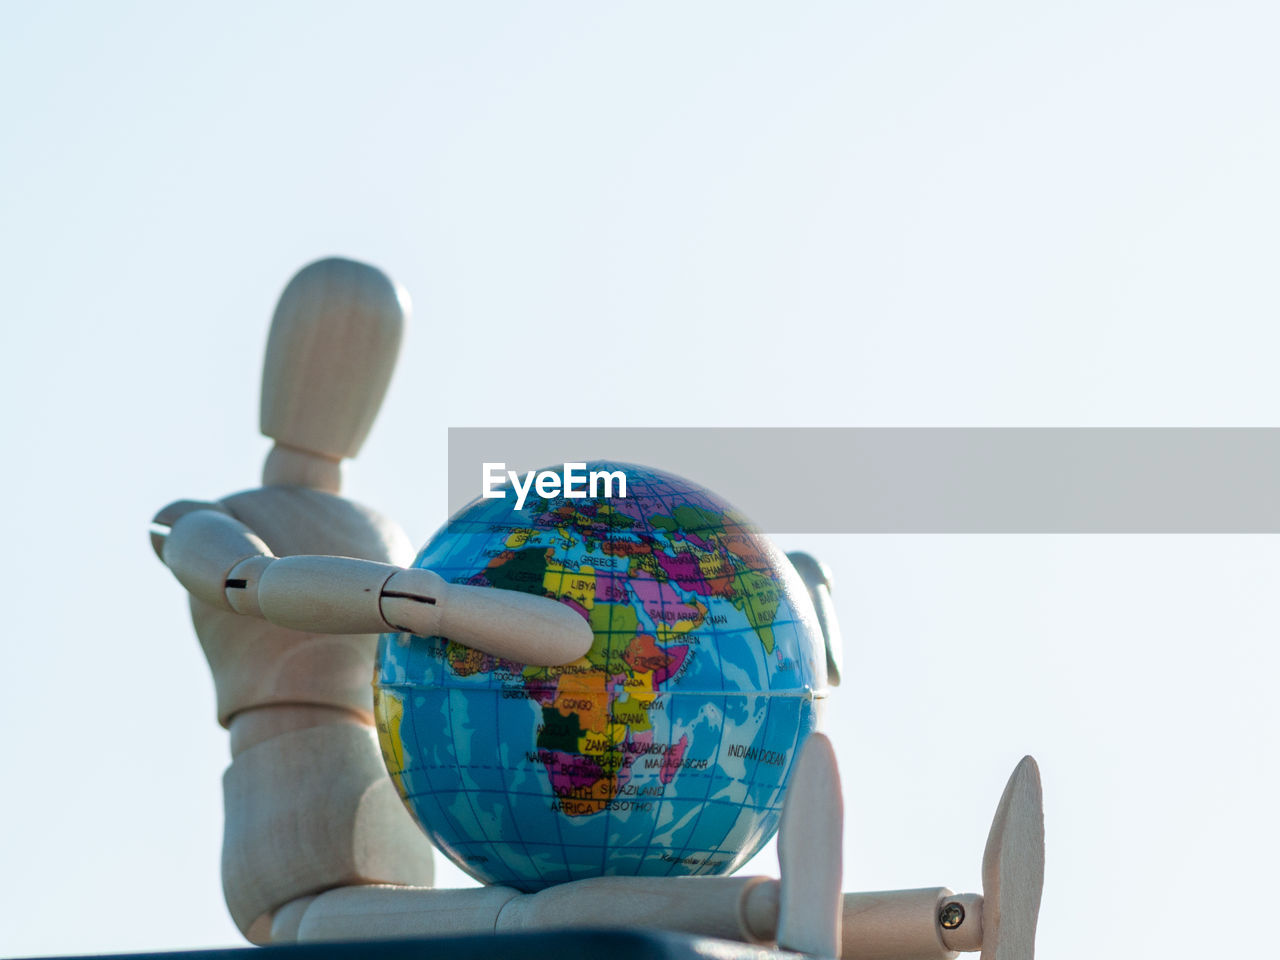 LOW ANGLE VIEW OF FIGURINE AGAINST CLEAR SKY